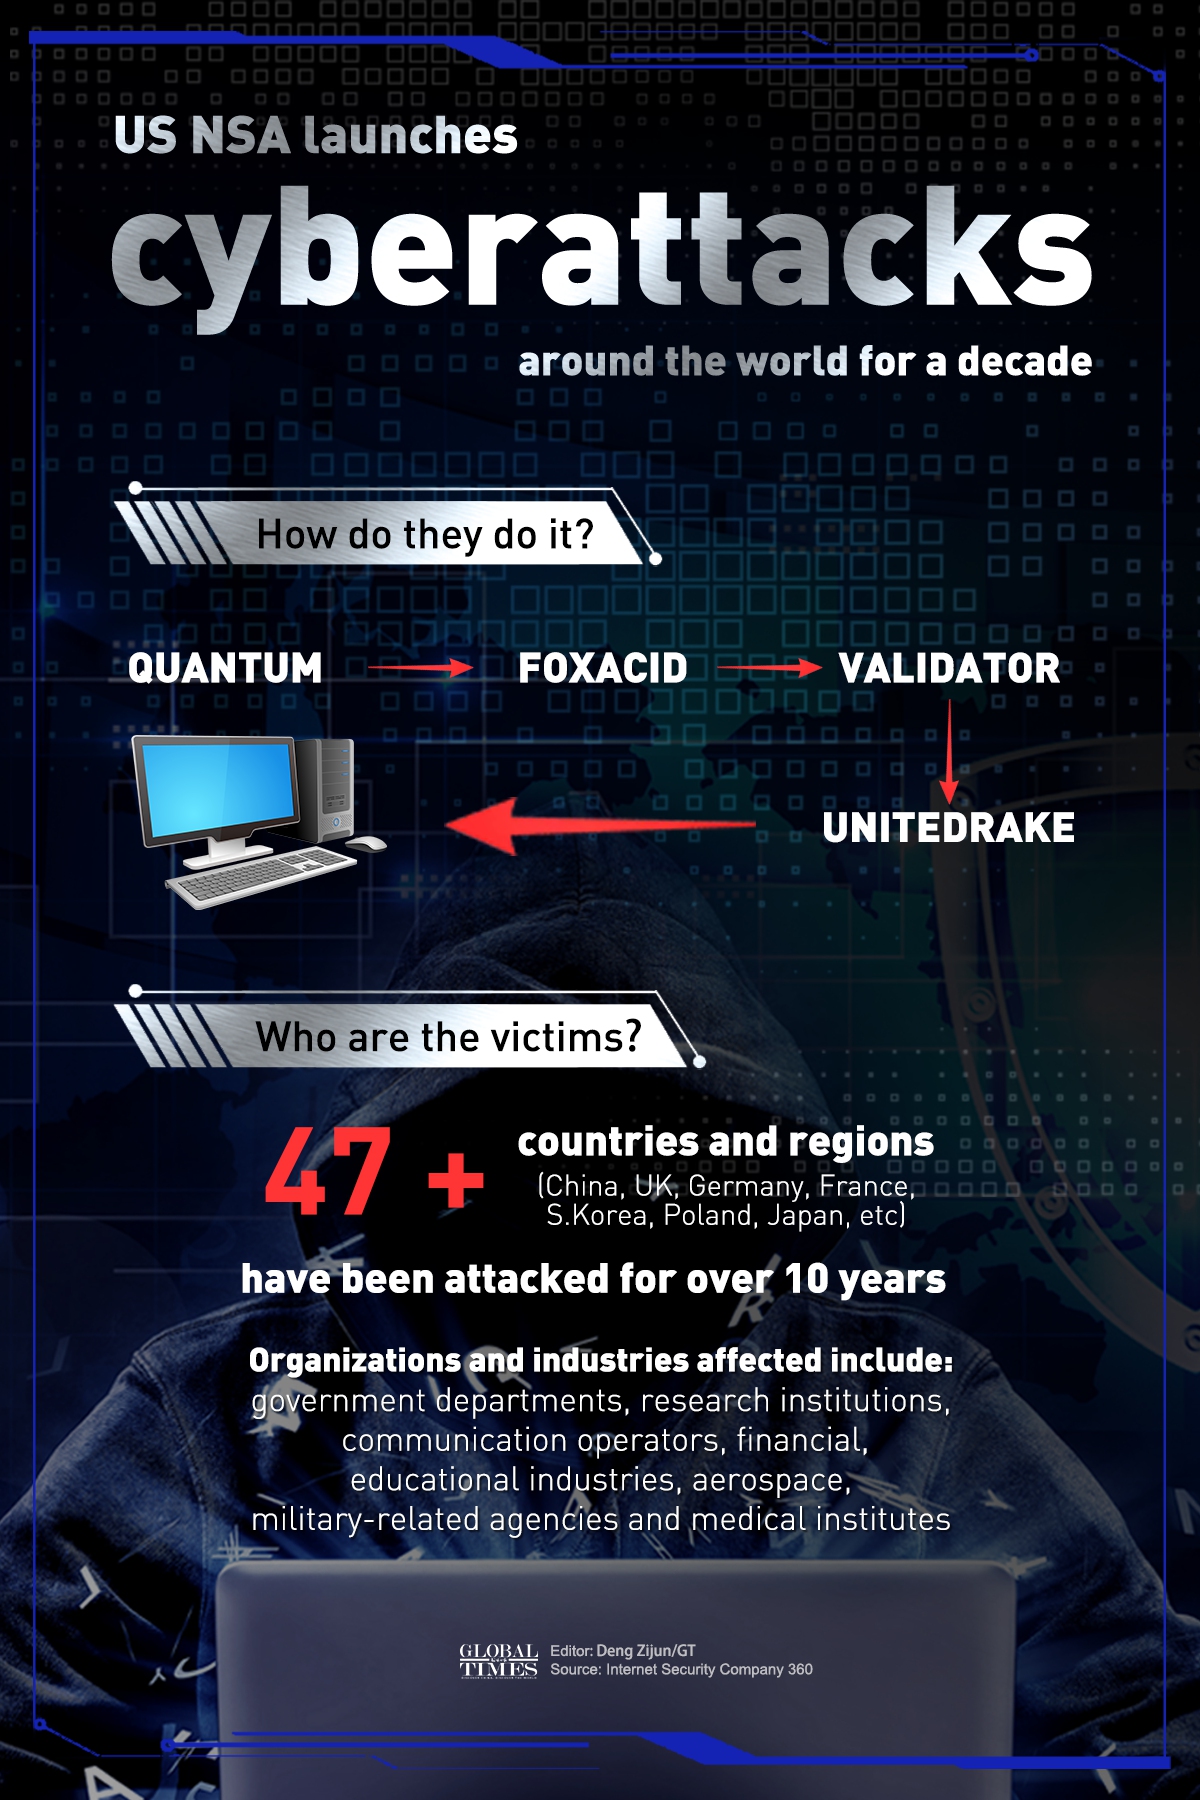 US NSA launches cyberattacks around the world for a decade Infographic: Deng Zijun/GT